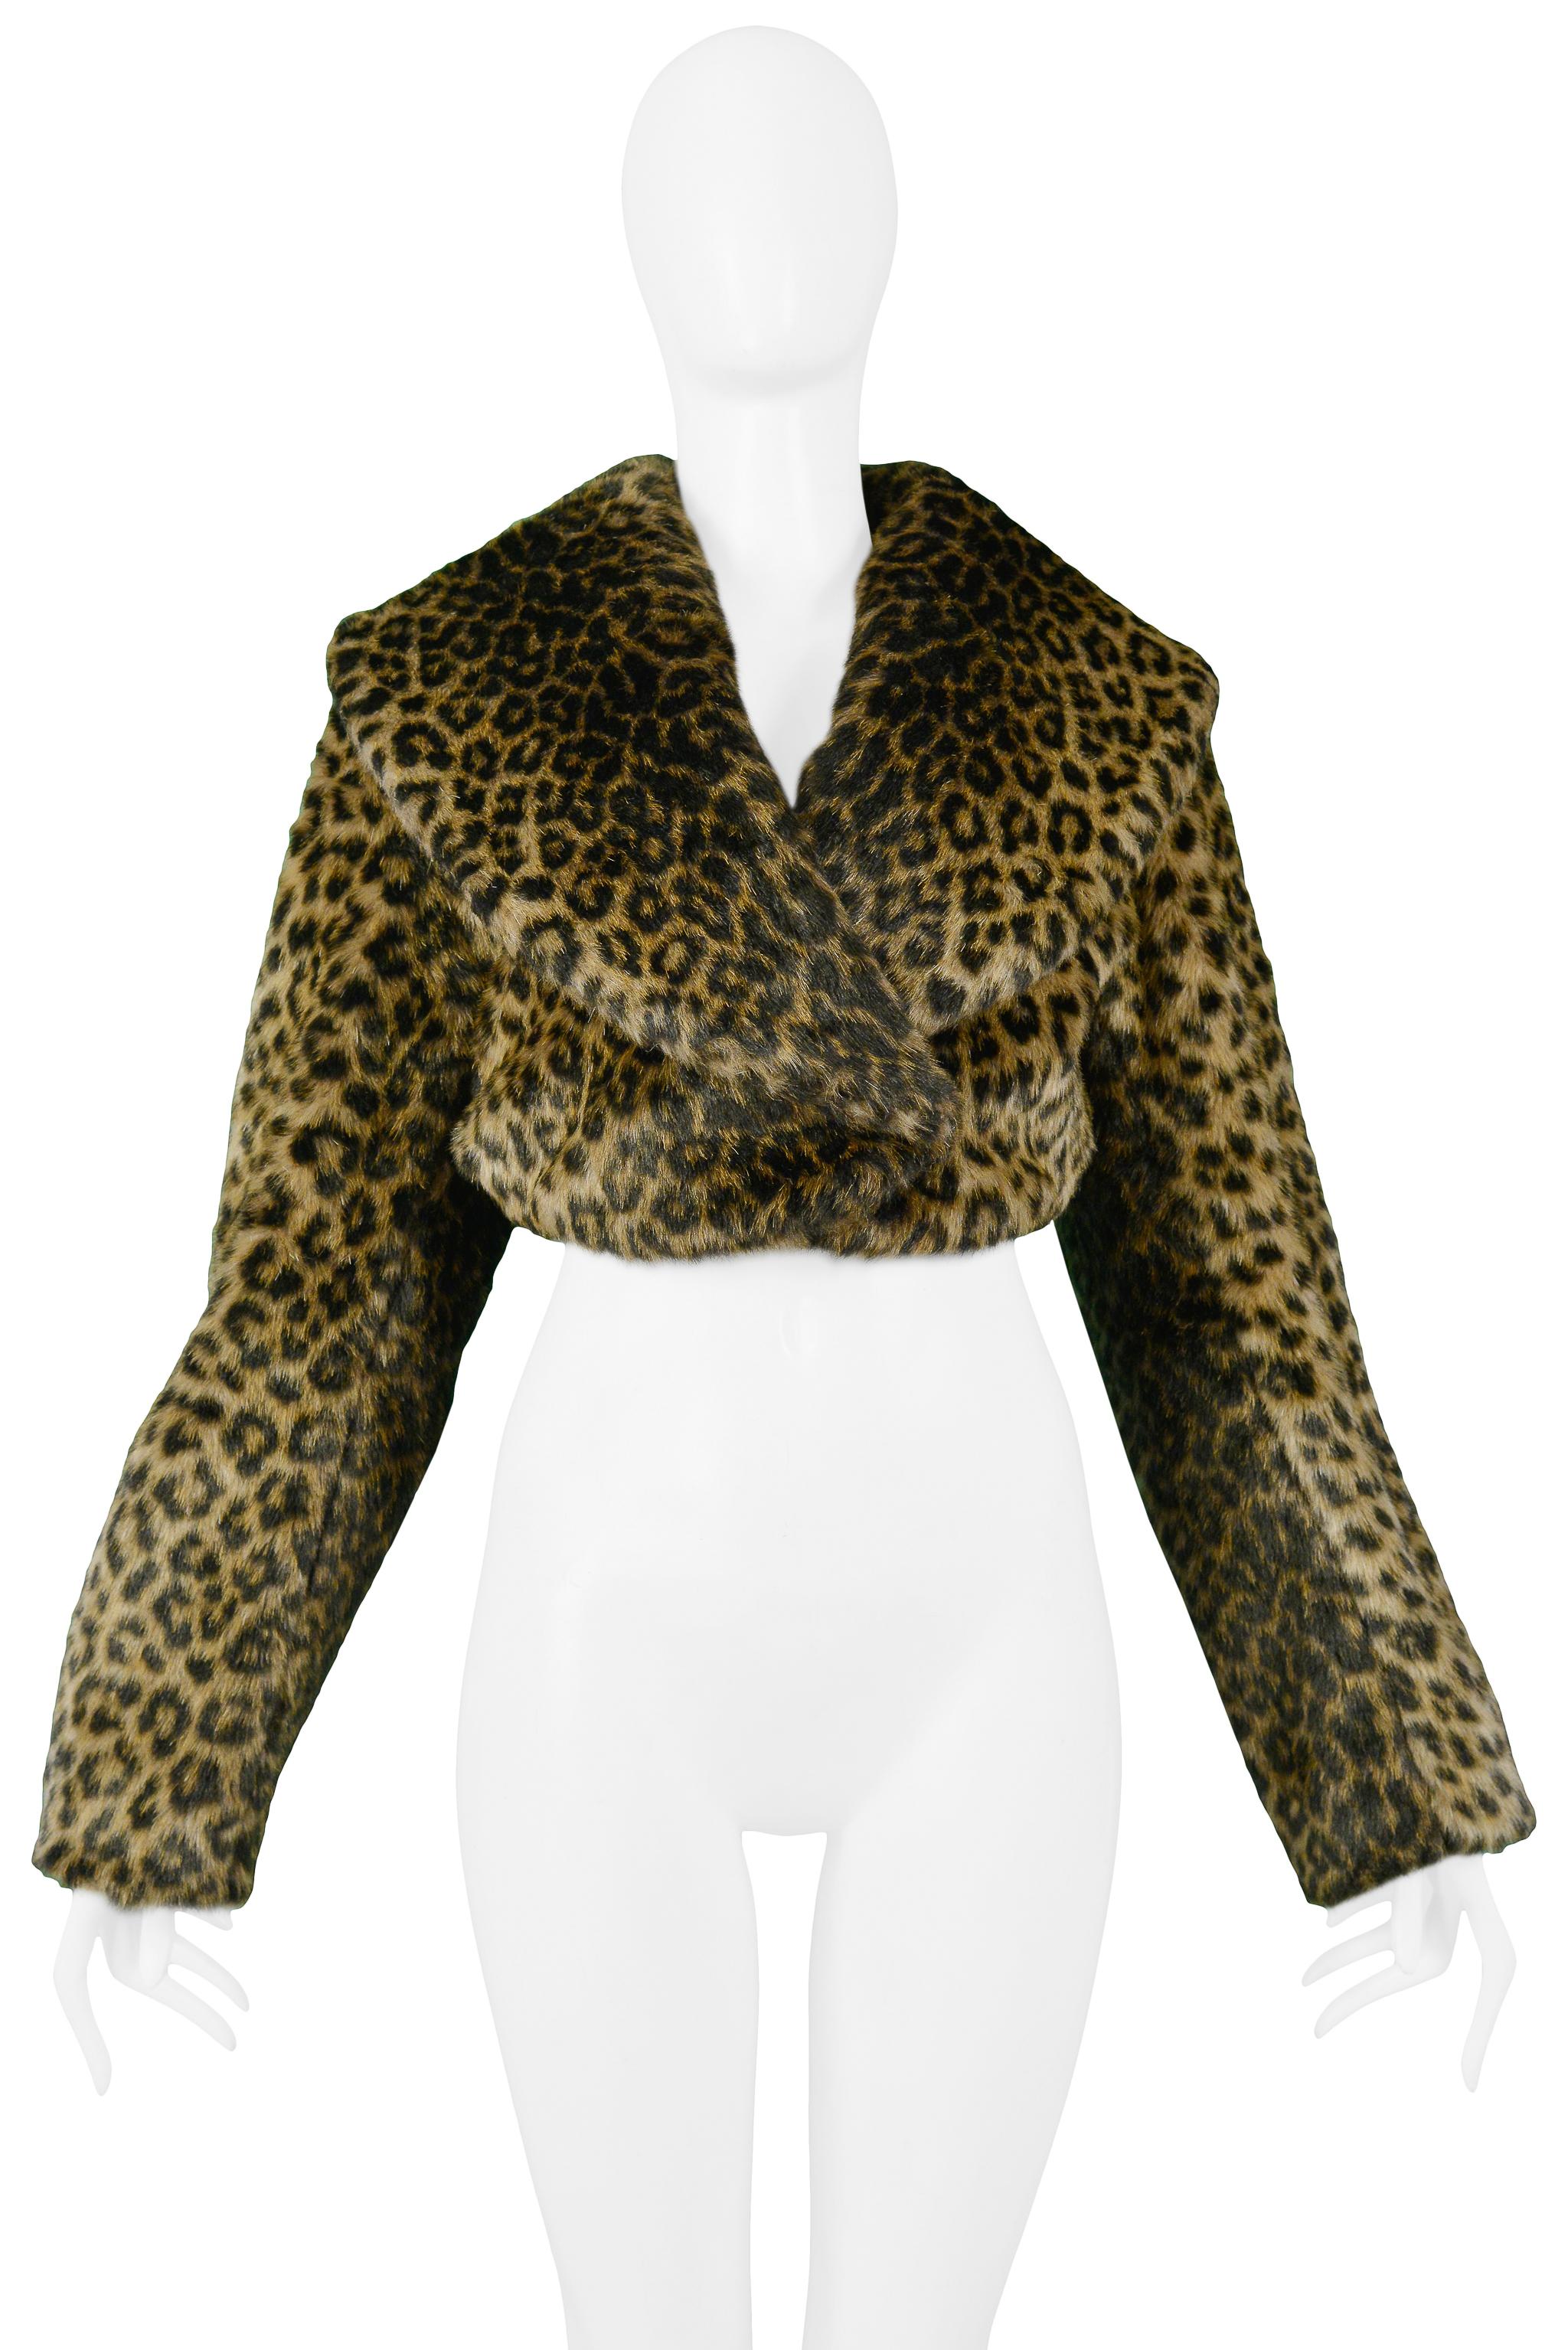 Brown Iconic Azzedine Alaia Faux Leopard Cropped Runway Jacket 1991